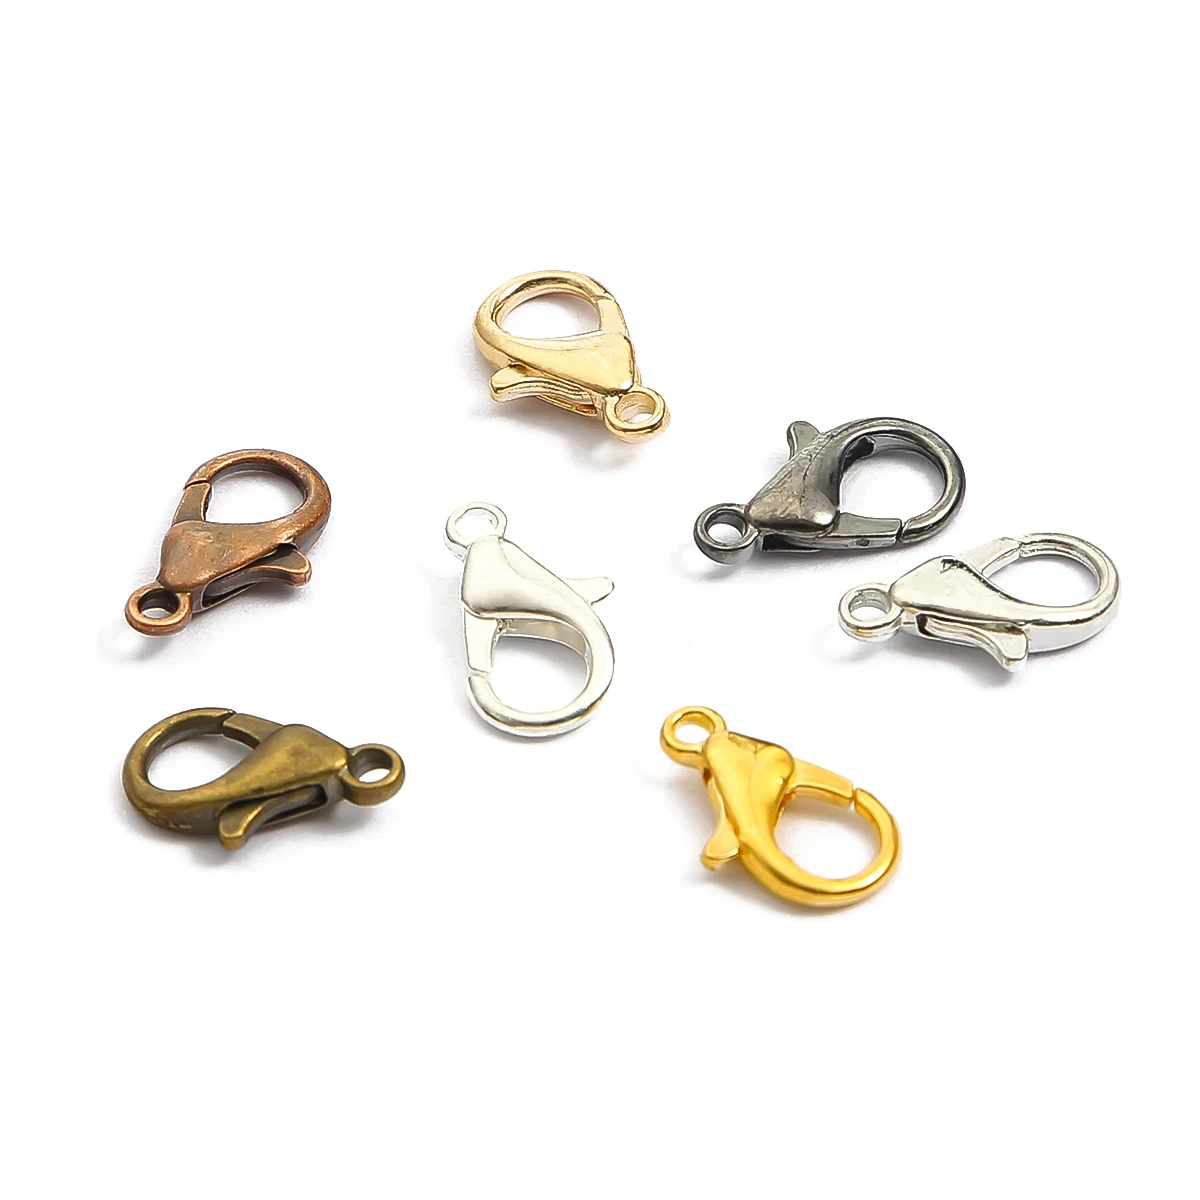 stainless steel jewelry components 10Pcs Gold 10 12 14 16 18 21mm Alloy Lobster Clasp Hooks Fashion Jewelry Findings Connector for Necklace Bracelet Chain DIY jewelry components wholesale